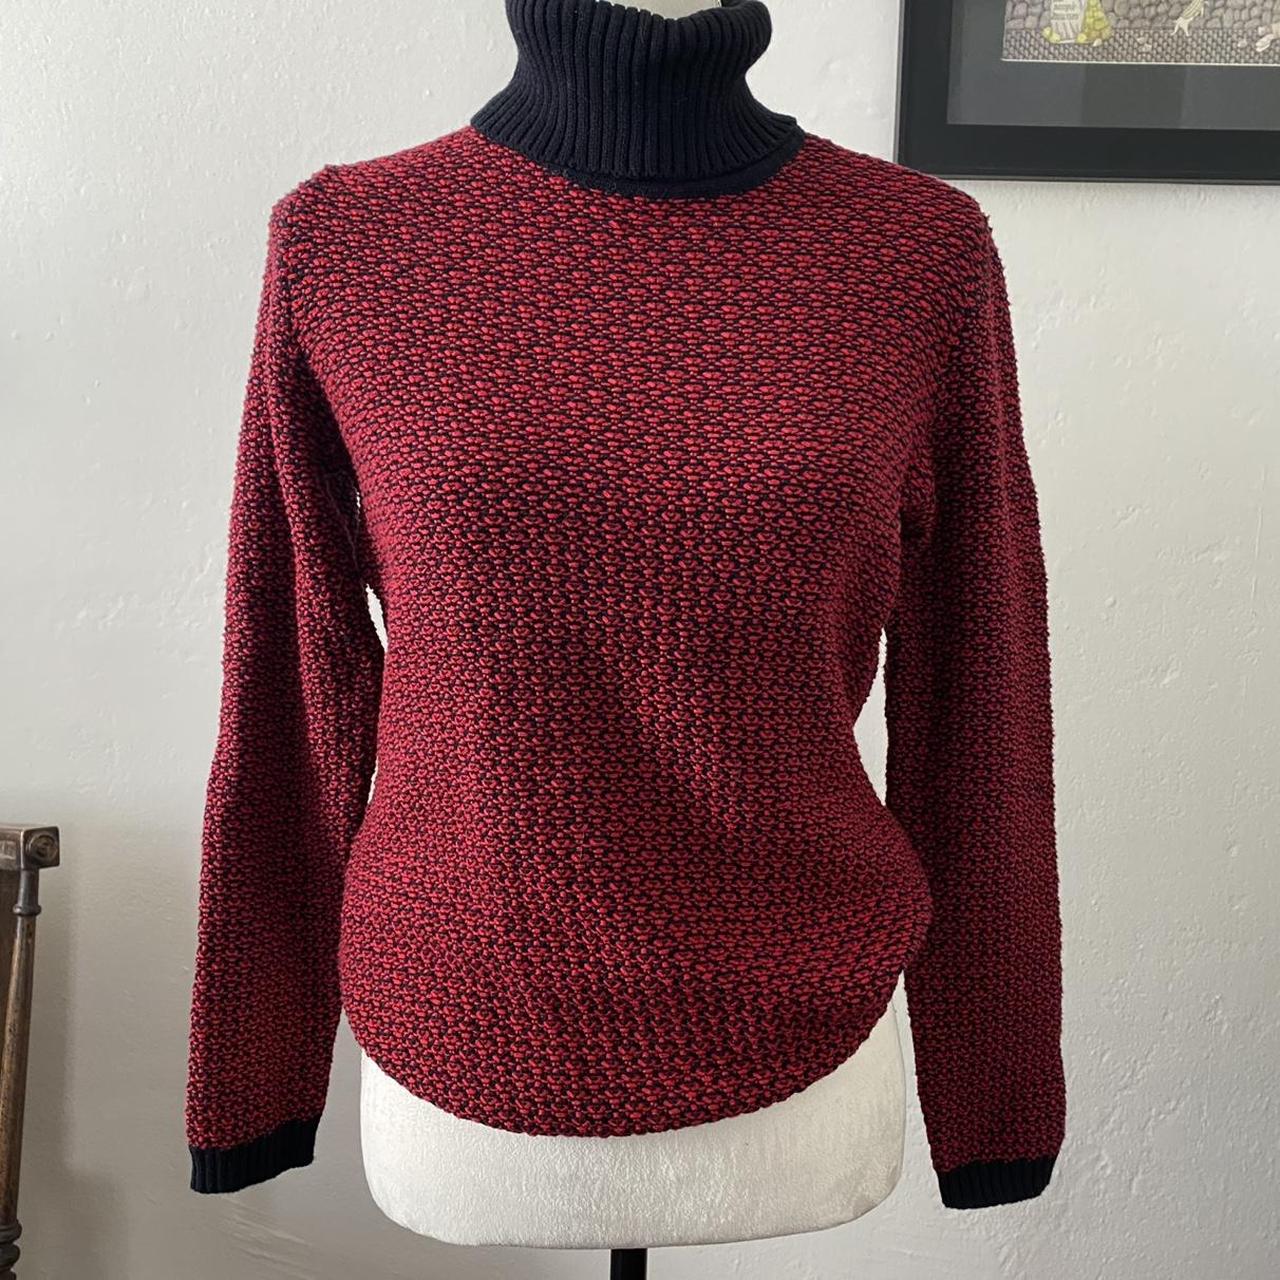 red and black heart stitch turtleneck sweater - Depop